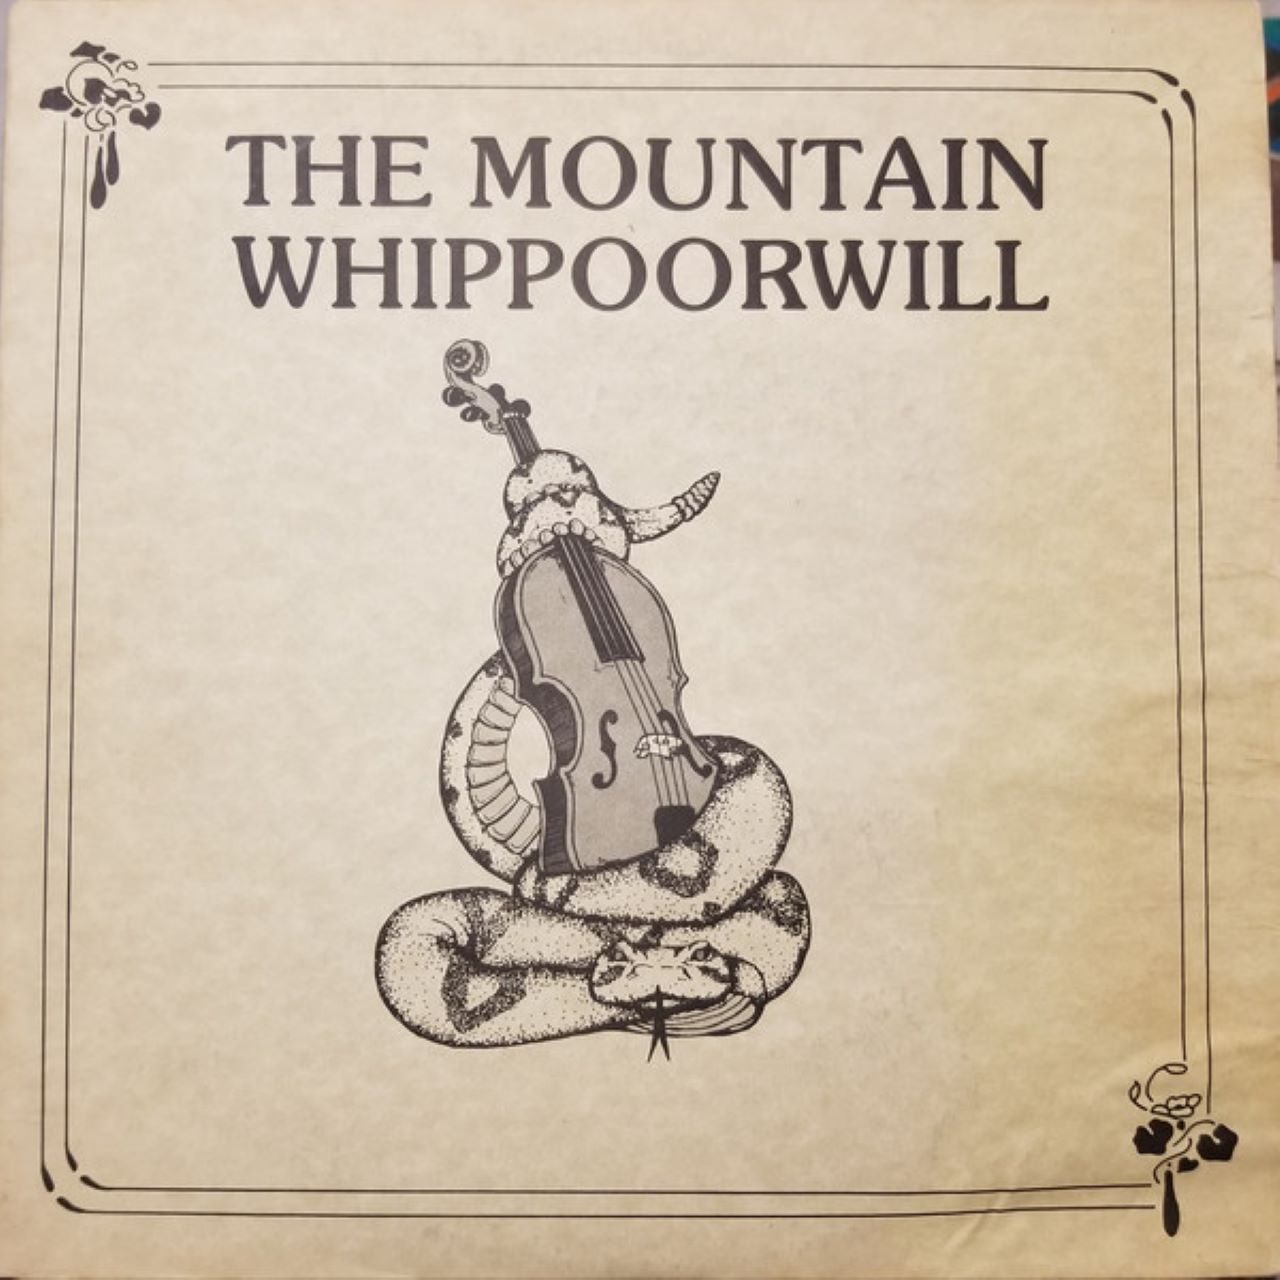 North Fork Rounders - The Mountain Whippoorwill cover album